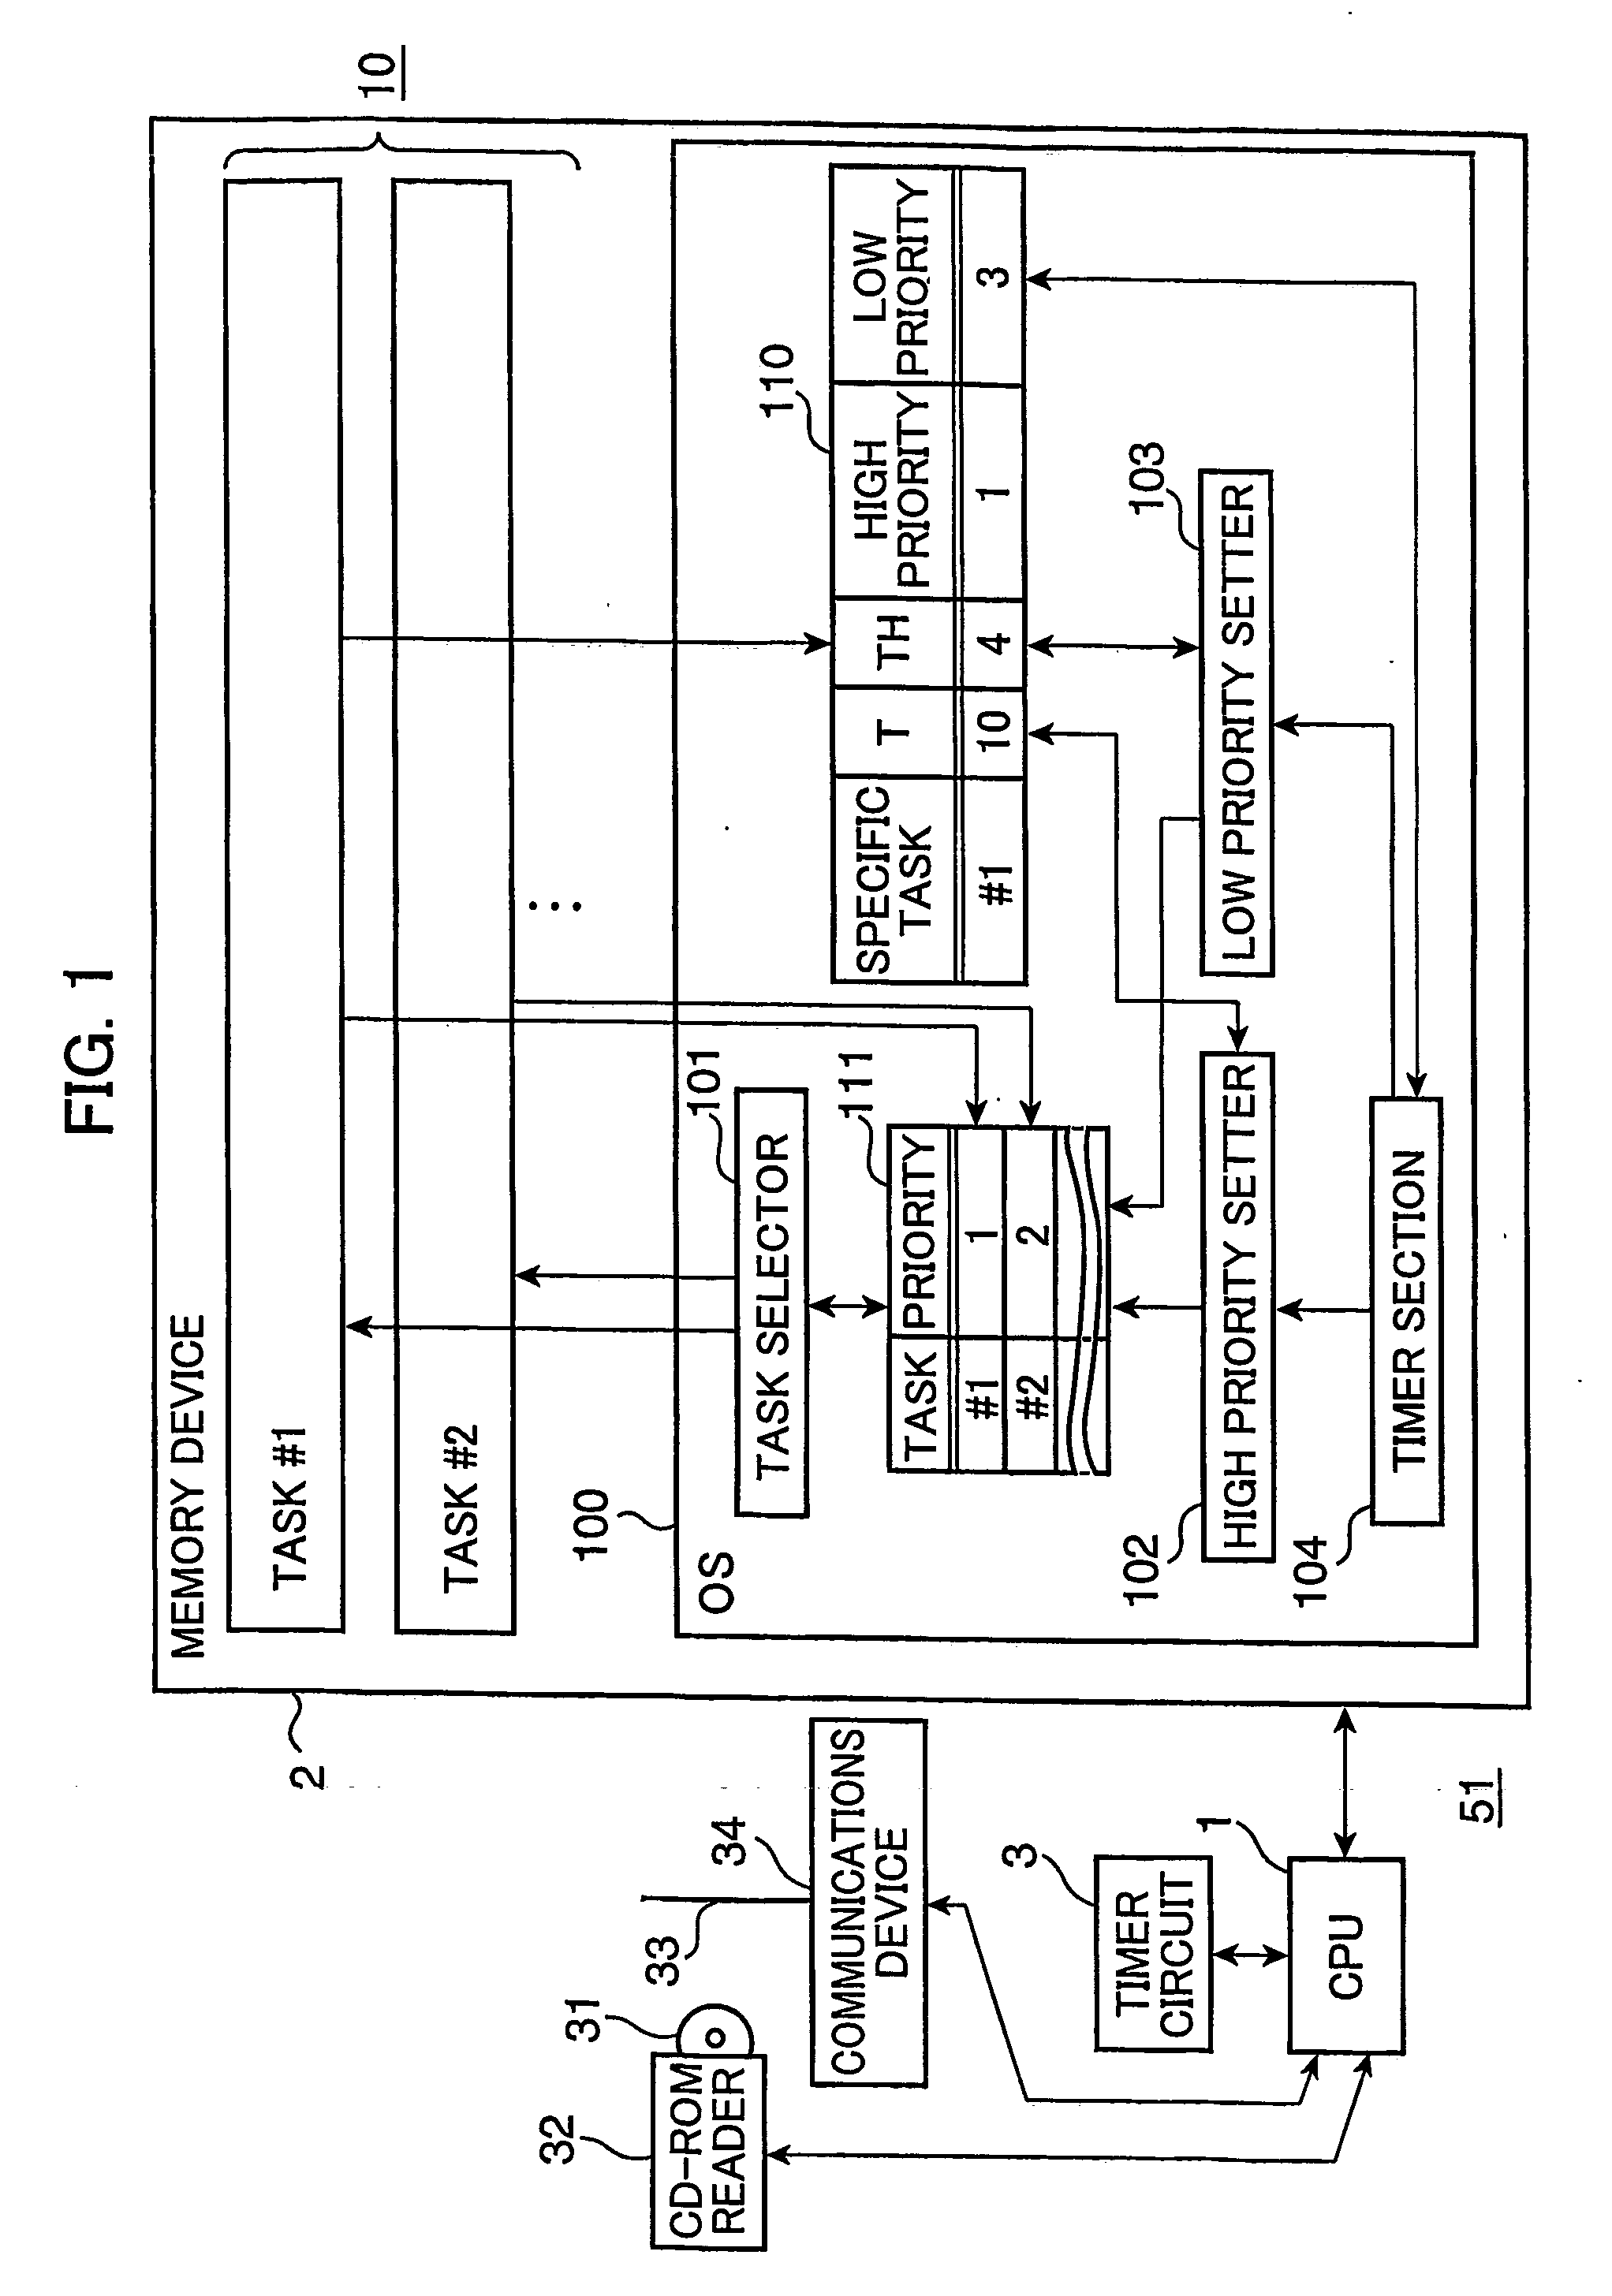 Task scheduling device, method, program, recording medium, and transmission medium for priority-driven periodic process scheduling